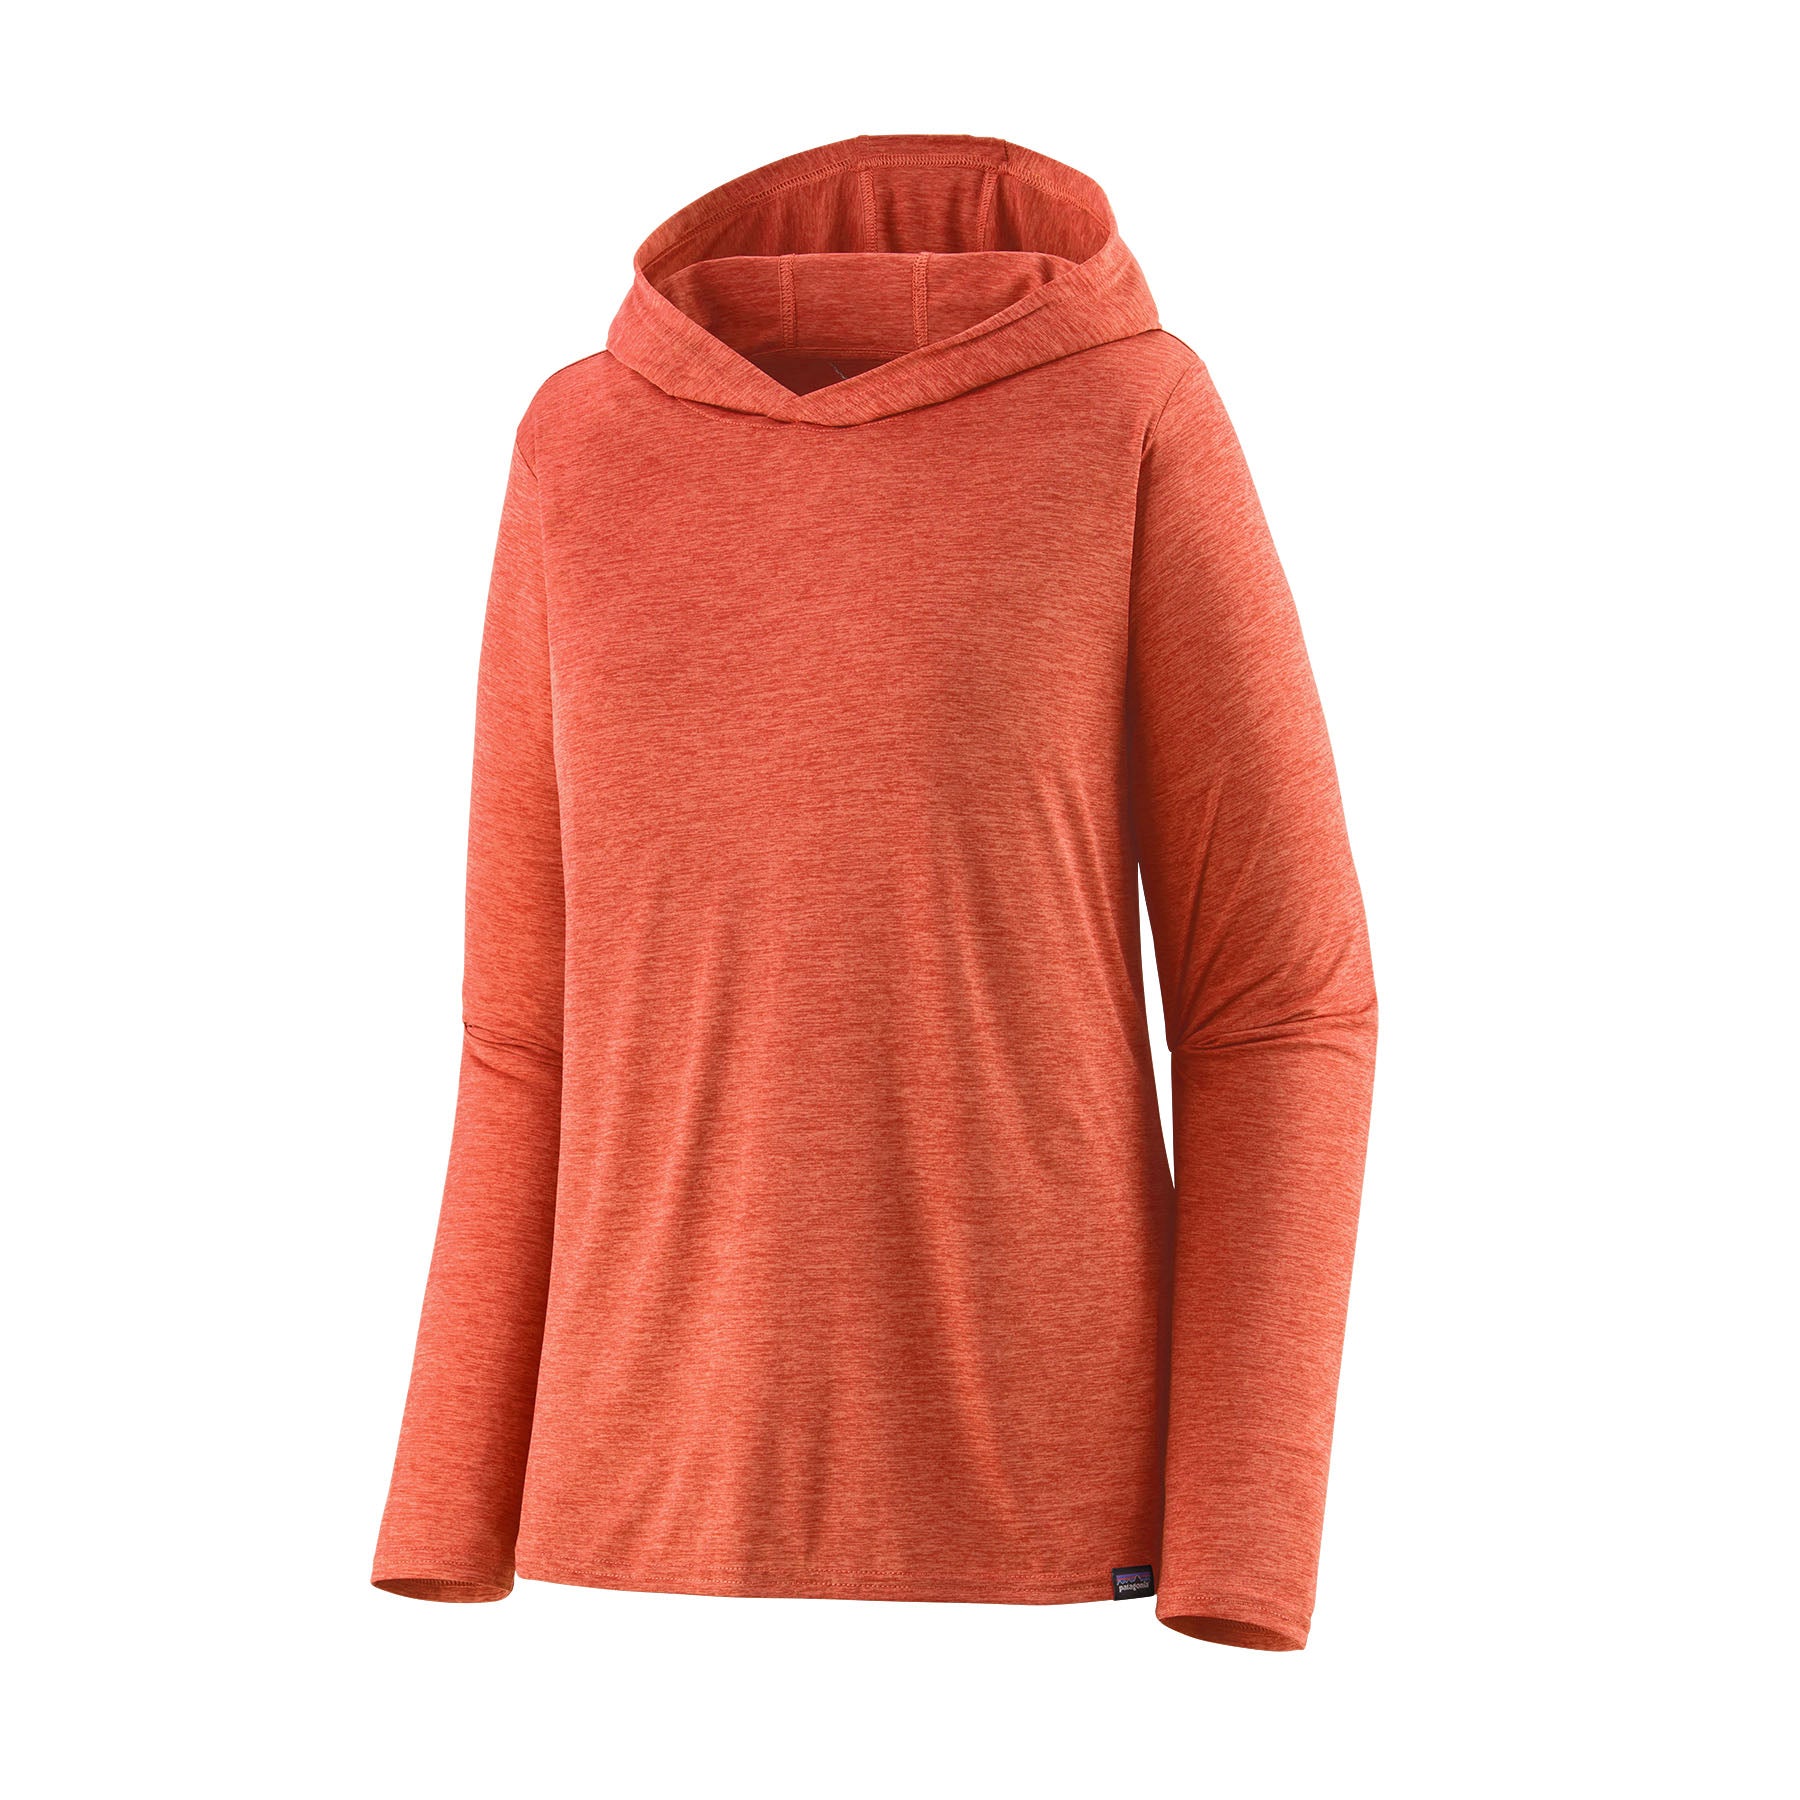 Women's Capilene® Cool Daily Hoody in Pimento Red - Coho Coral X - Dye | Patagonia Bend